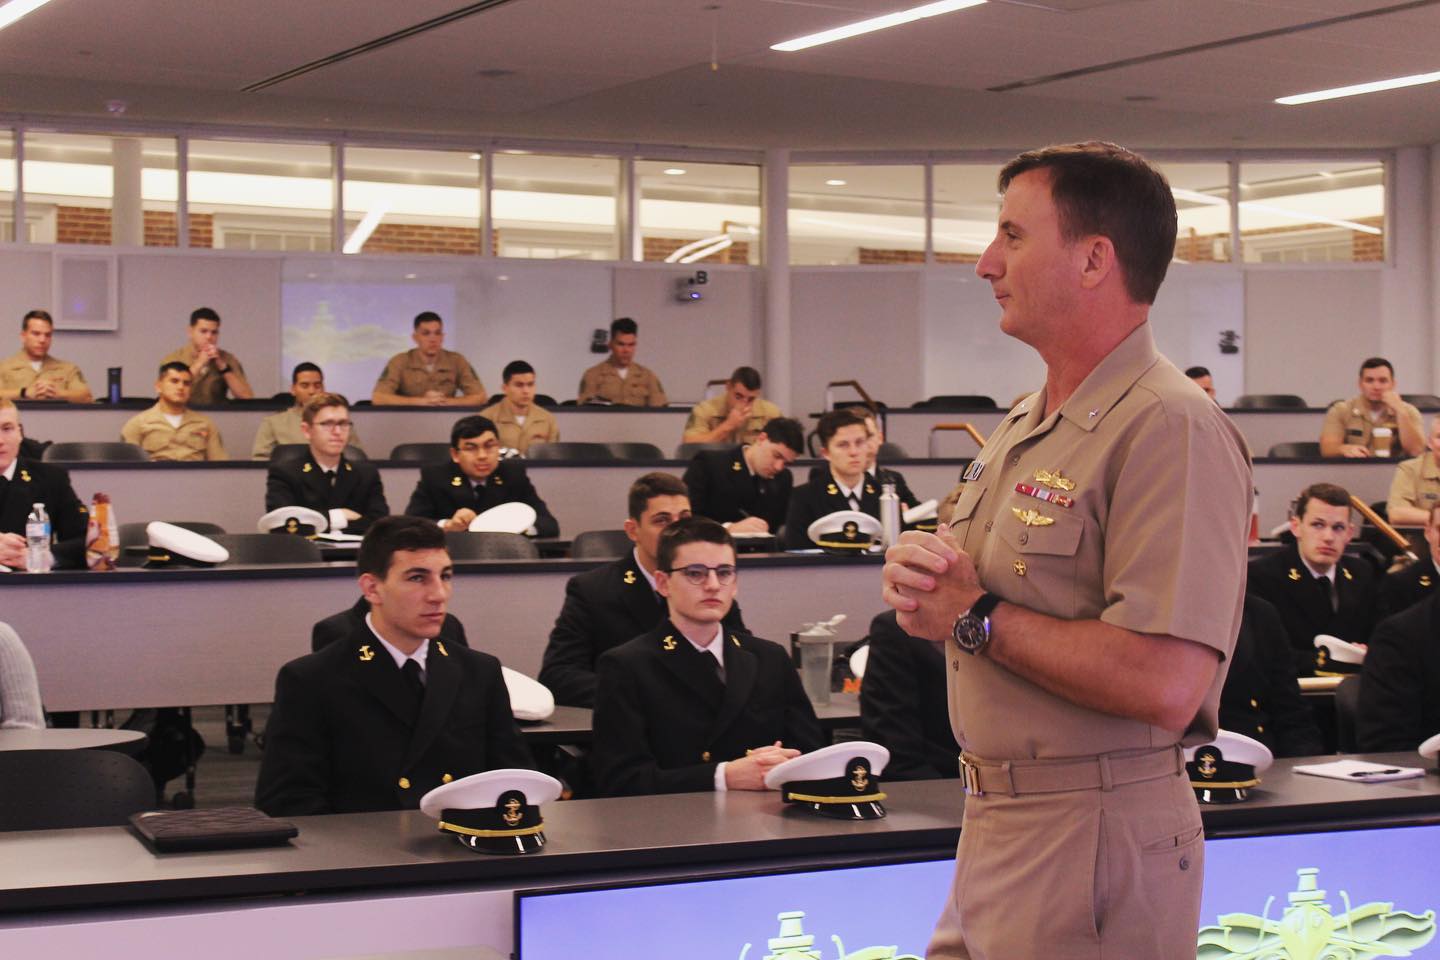 Naval Officer addresses a lecture hall of students in uniform